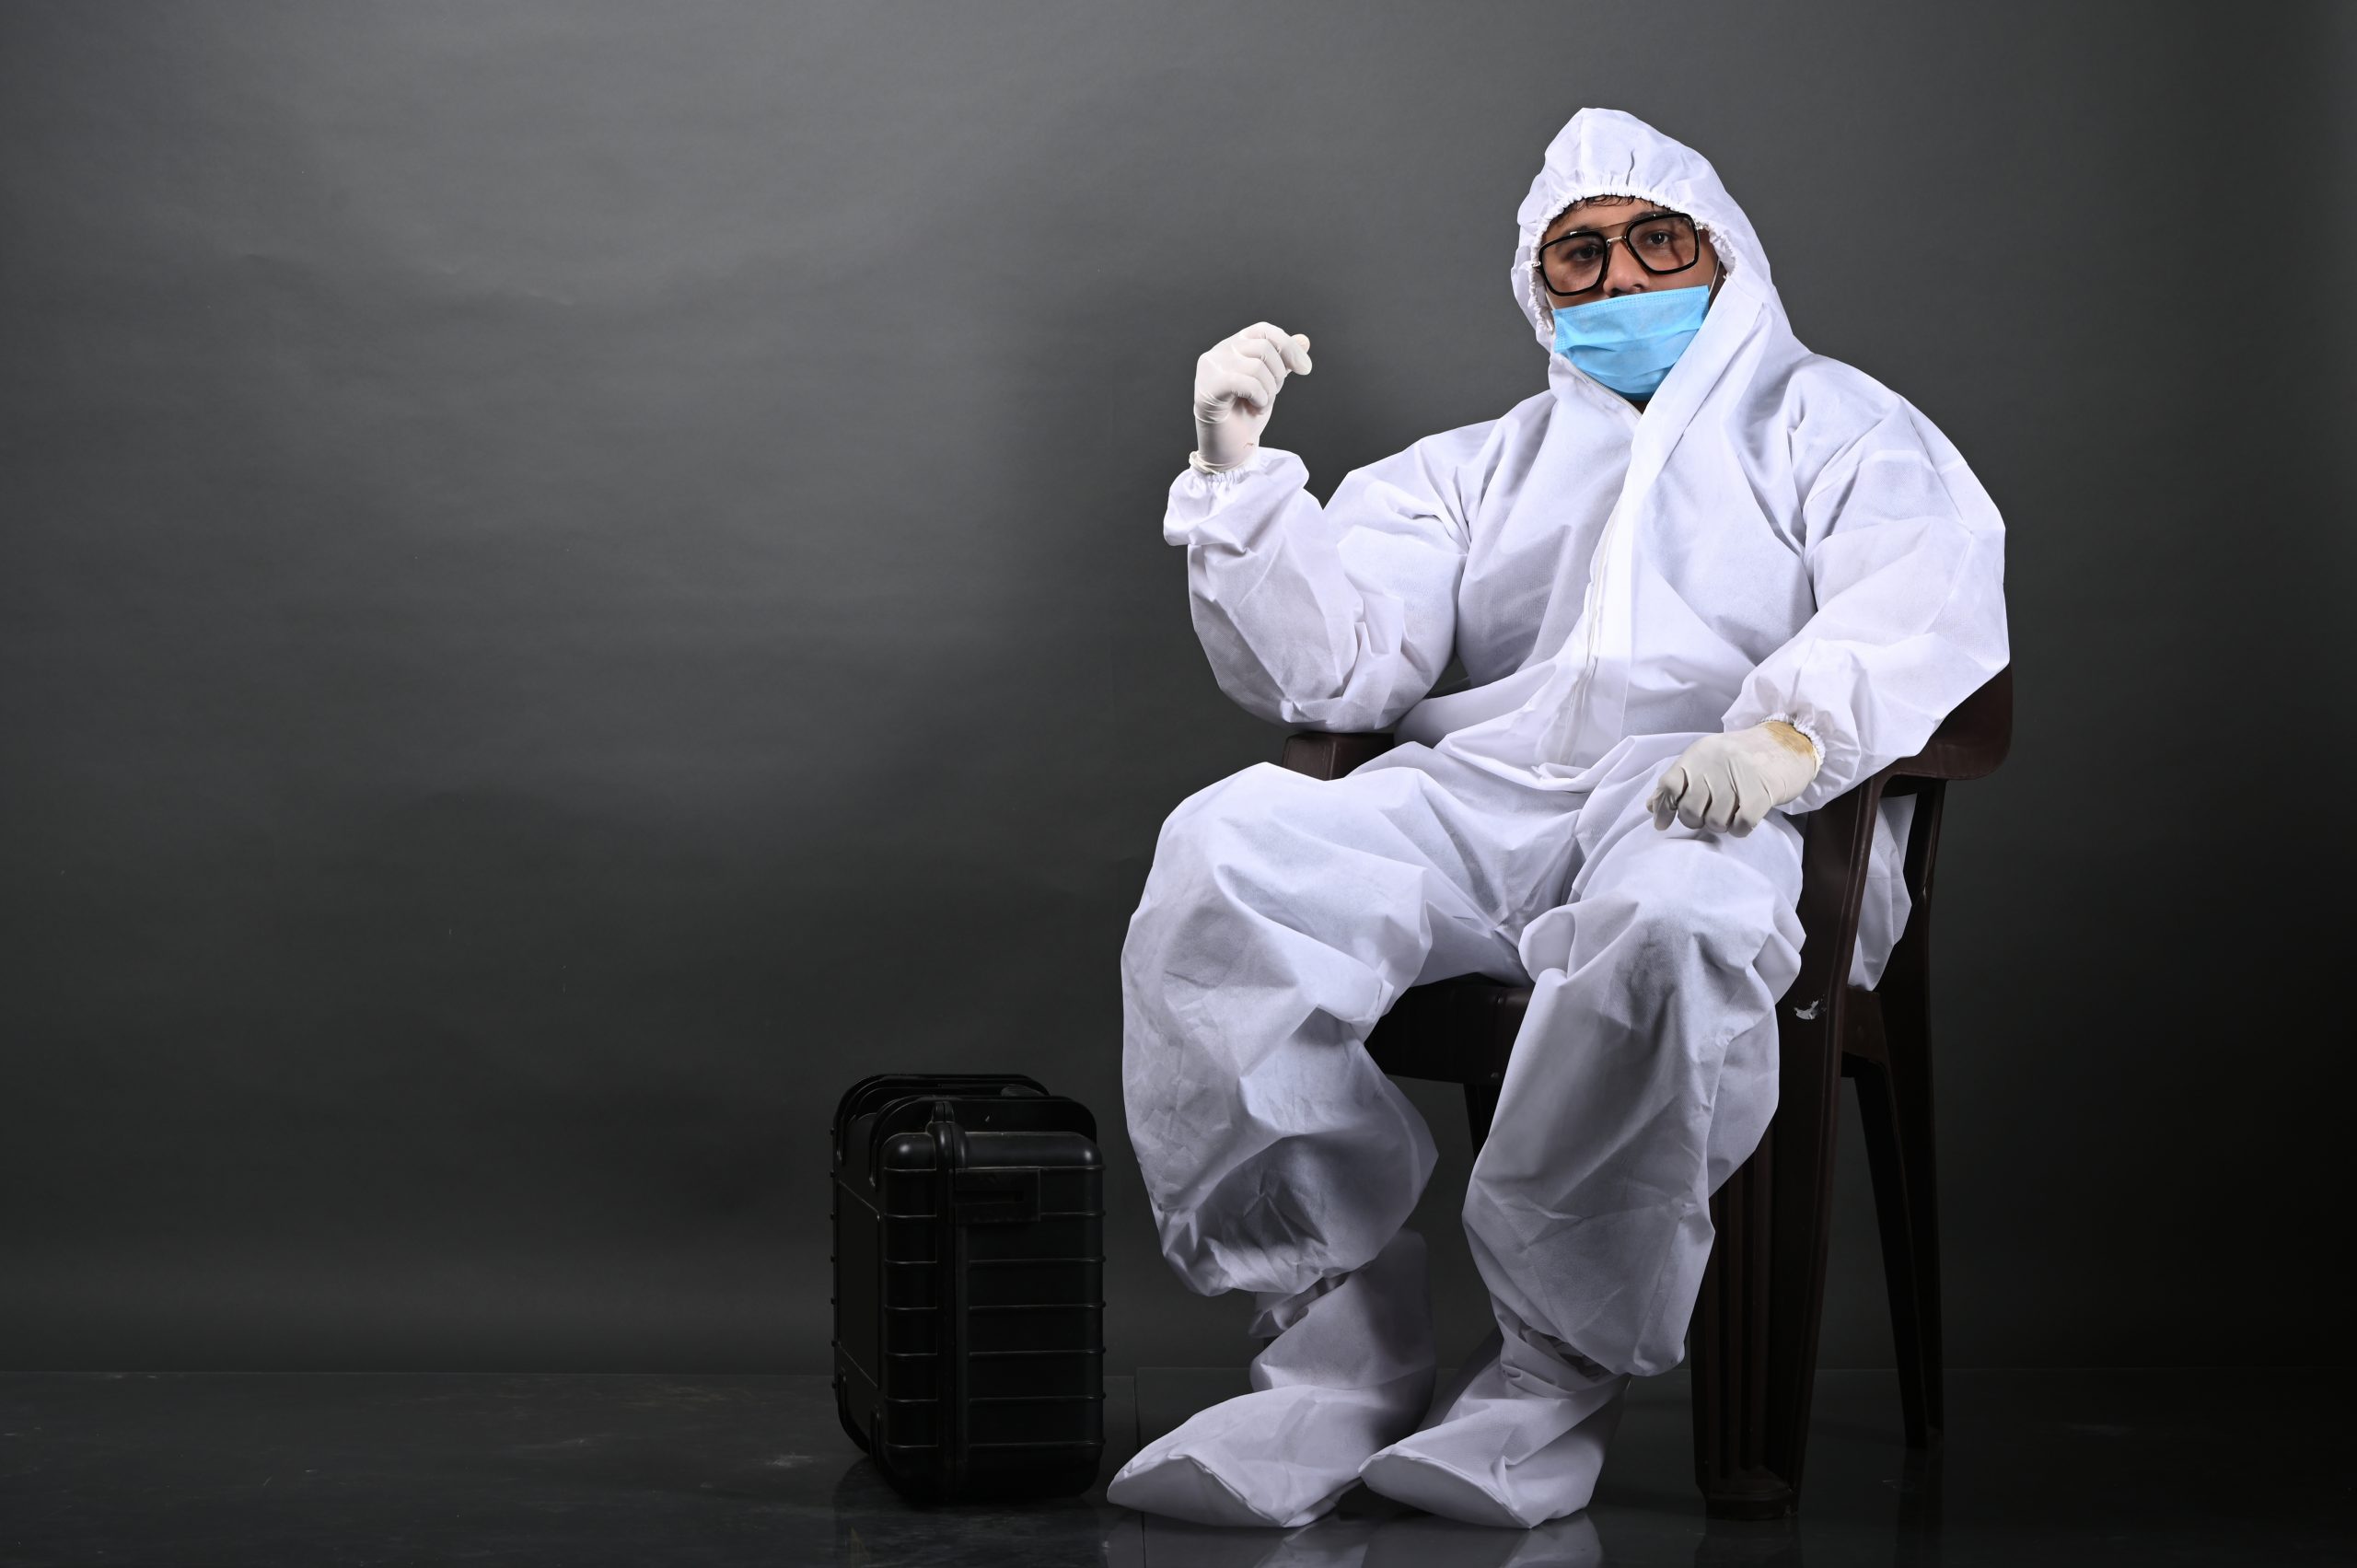 Man sitting on chair in PPE kit